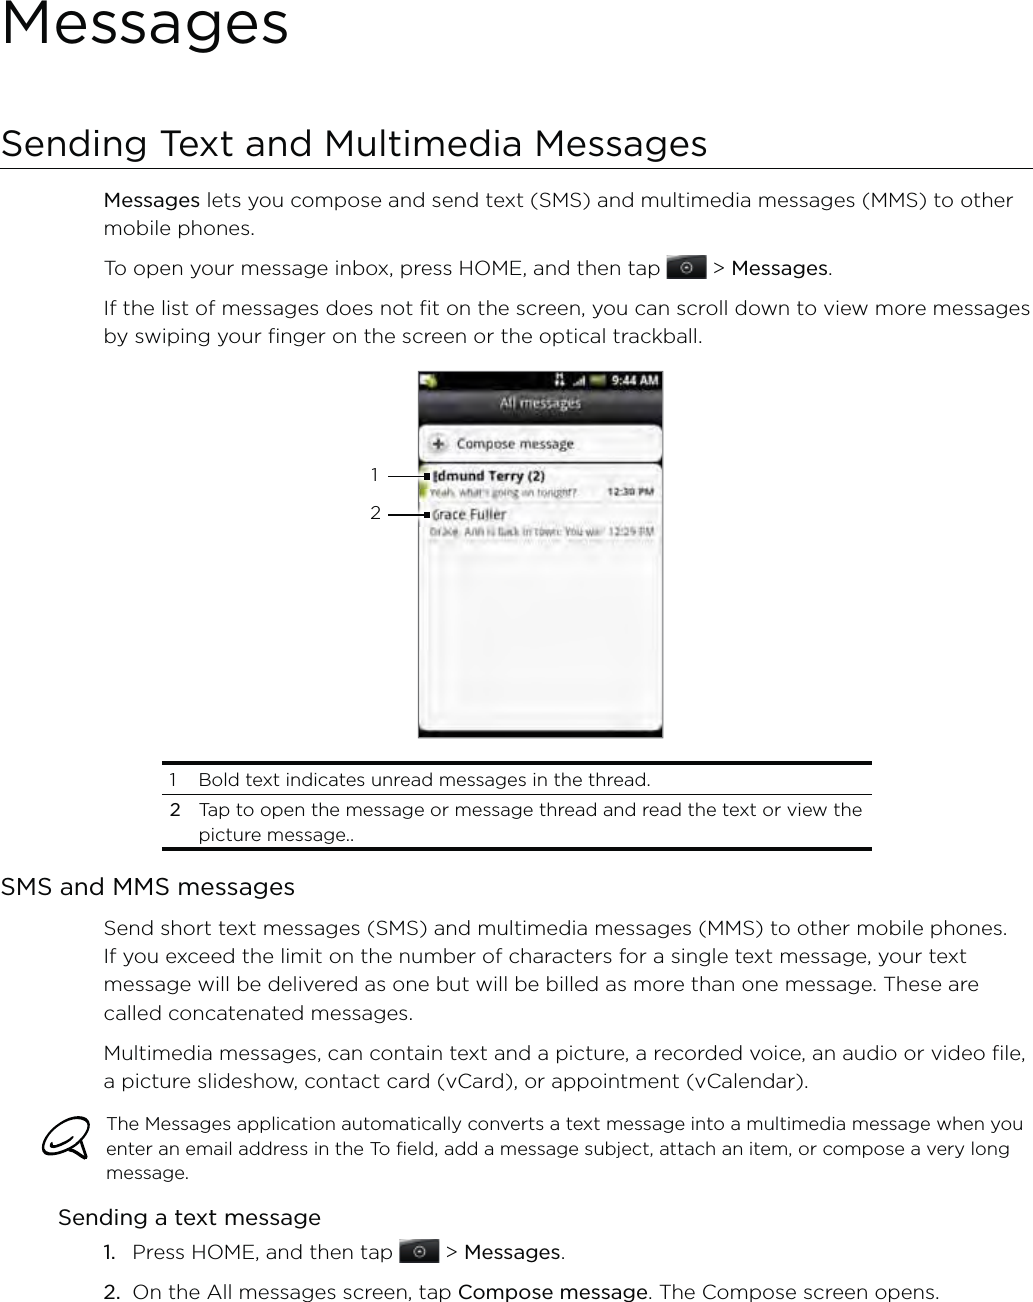 MessagesSending Text and Multimedia MessagesMessages lets you compose and send text (SMS) and multimedia messages (MMS) to other mobile phones.To open your message inbox, press HOME, and then tap   &gt; Messages.If the list of messages does not fit on the screen, you can scroll down to view more messages by swiping your finger on the screen or the optical trackball. 121  Bold text indicates unread messages in the thread. 2 Tap to open the message or message thread and read the text or view the picture message..SMS and MMS messagesSend short text messages (SMS) and multimedia messages (MMS) to other mobile phones. If you exceed the limit on the number of characters for a single text message, your text message will be delivered as one but will be billed as more than one message. These are called concatenated messages.Multimedia messages, can contain text and a picture, a recorded voice, an audio or video file, a picture slideshow, contact card (vCard), or appointment (vCalendar).The Messages application automatically converts a text message into a multimedia message when you enter an email address in the To field, add a message subject, attach an item, or compose a very long message.Sending a text messagePress HOME, and then tap   &gt; Messages.On the All messages screen, tap Compose message. The Compose screen opens.1.2.